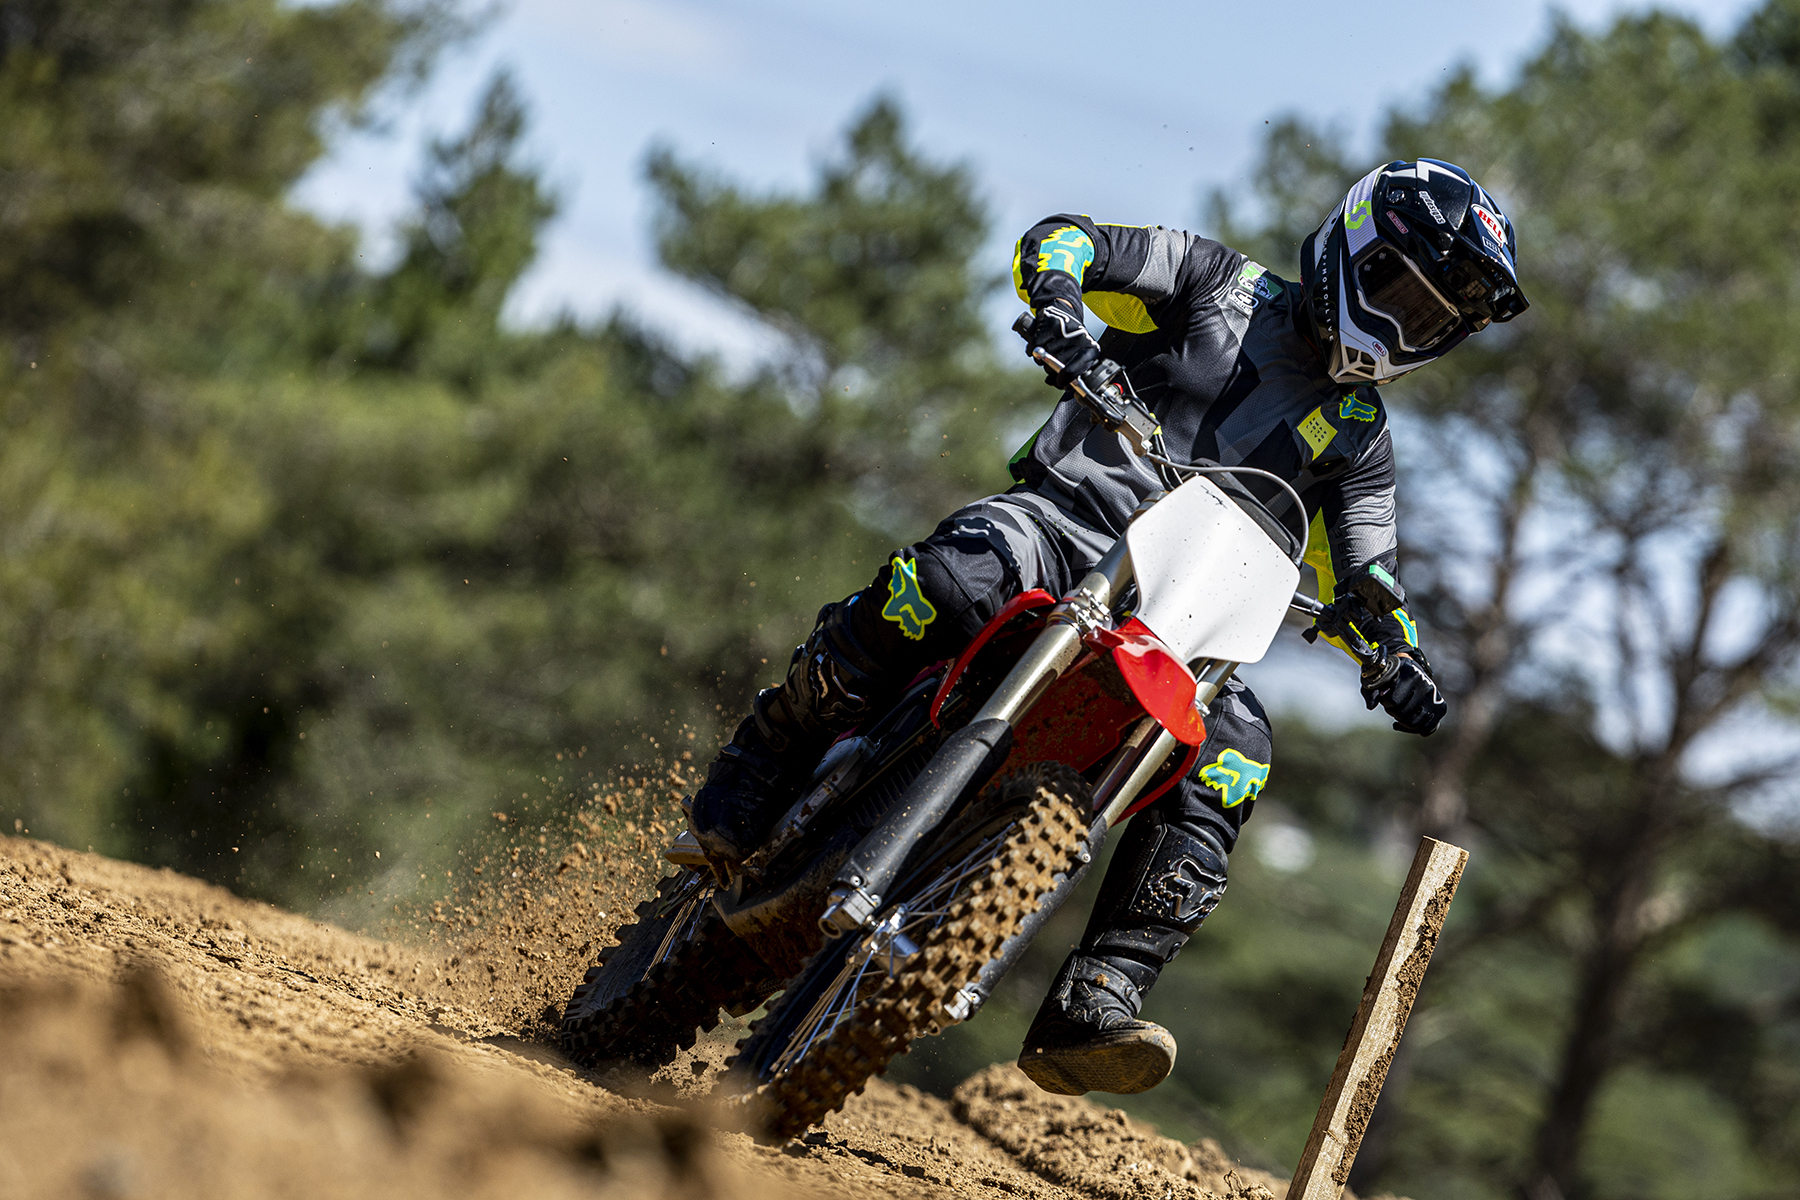 We Test Ride the All-Electric Stark Future VARG MX - Motocross Feature -  Vital MX